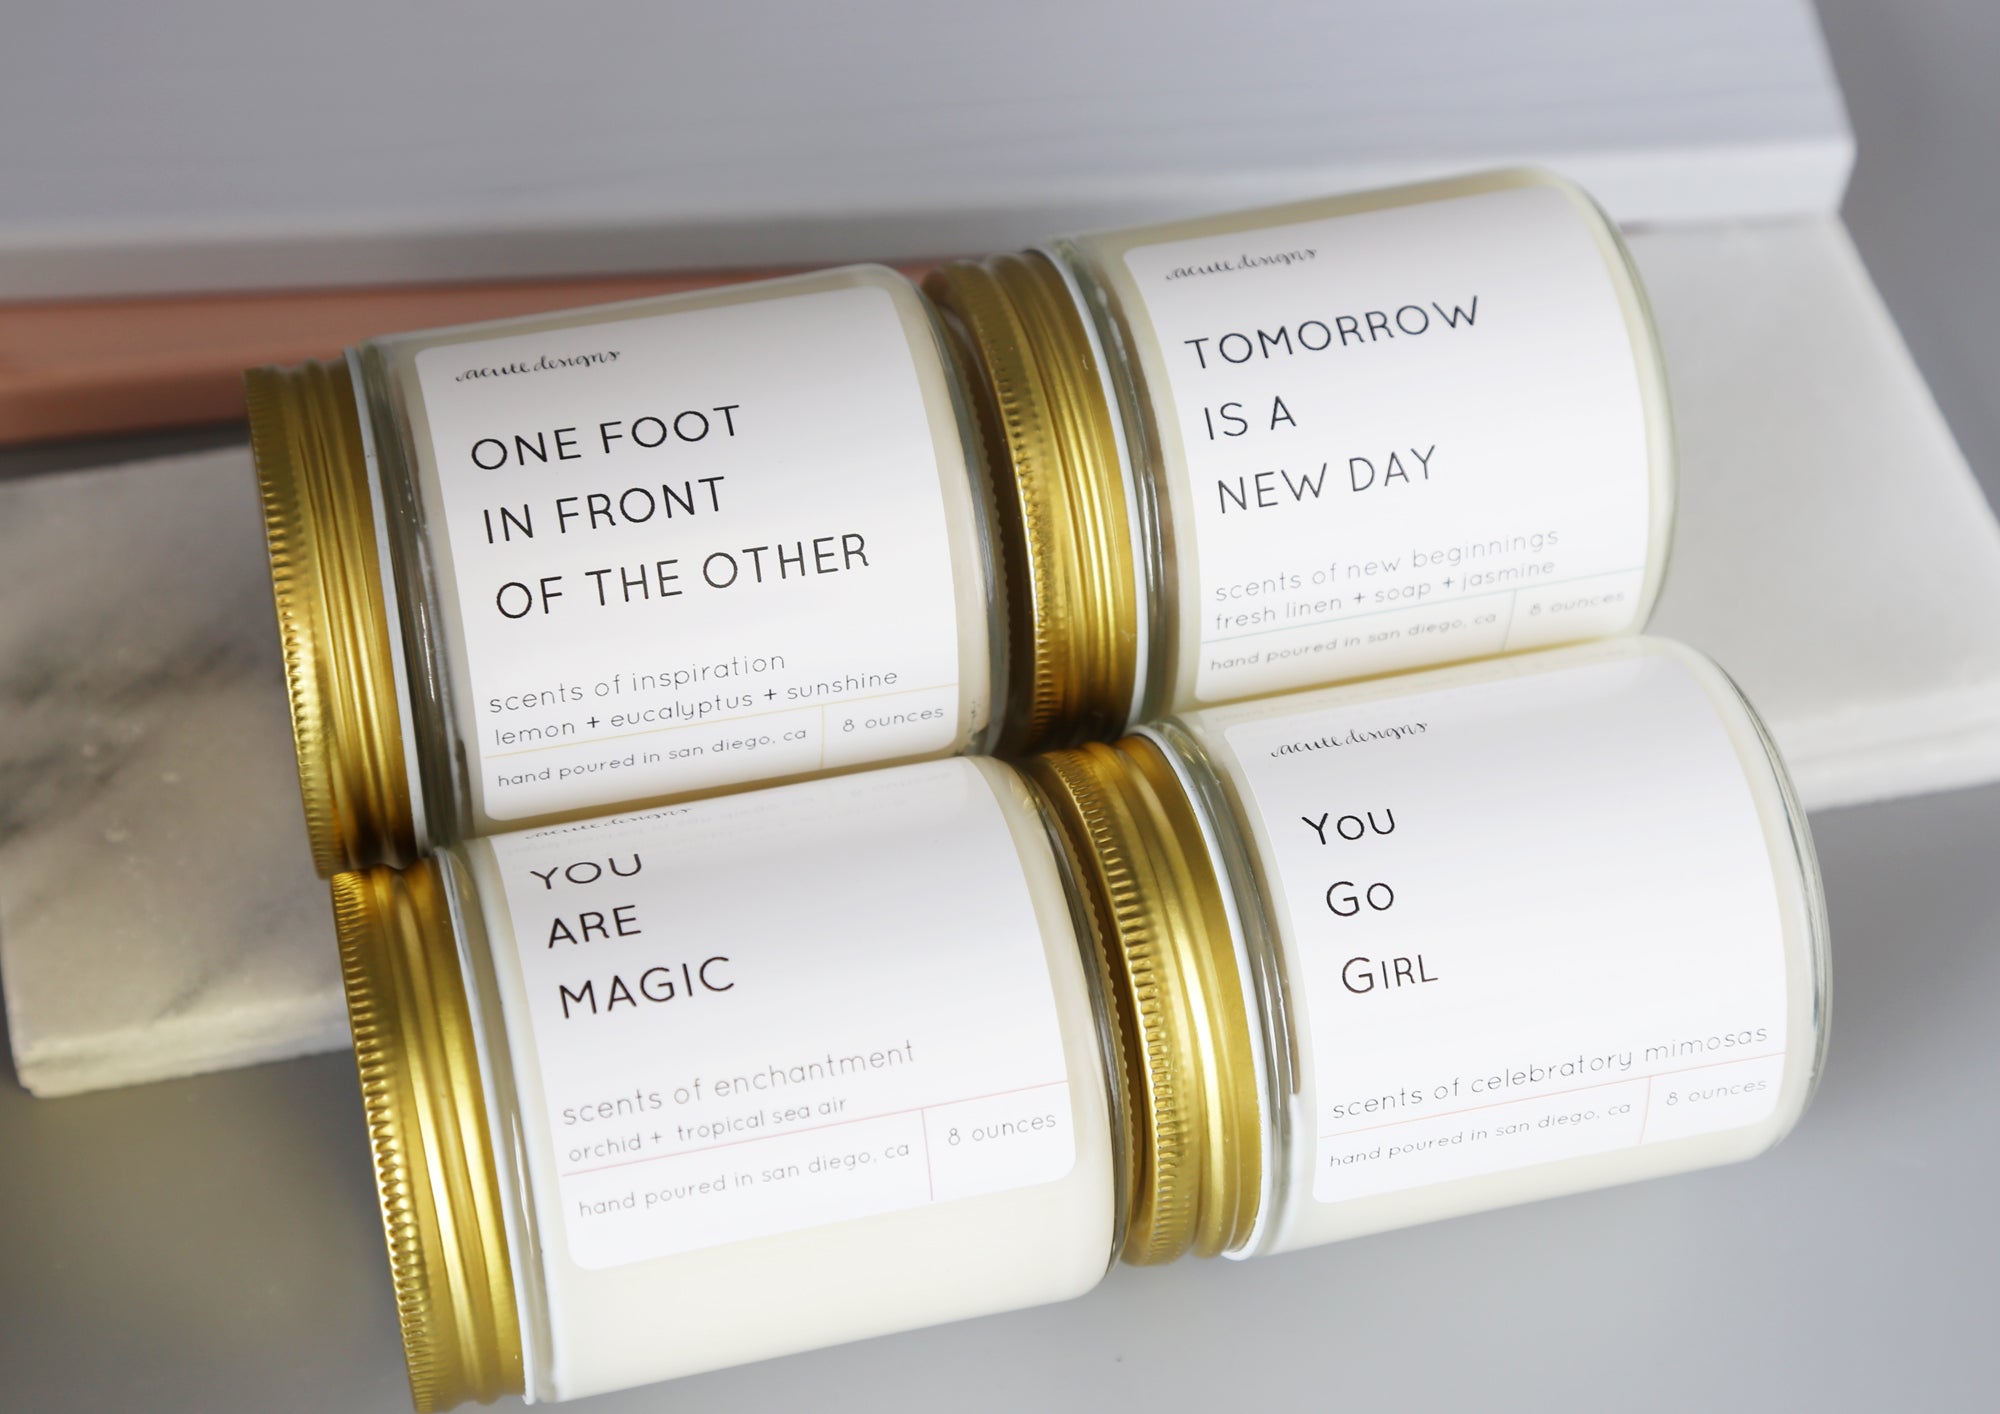 You Go Girl - Motivational Candles